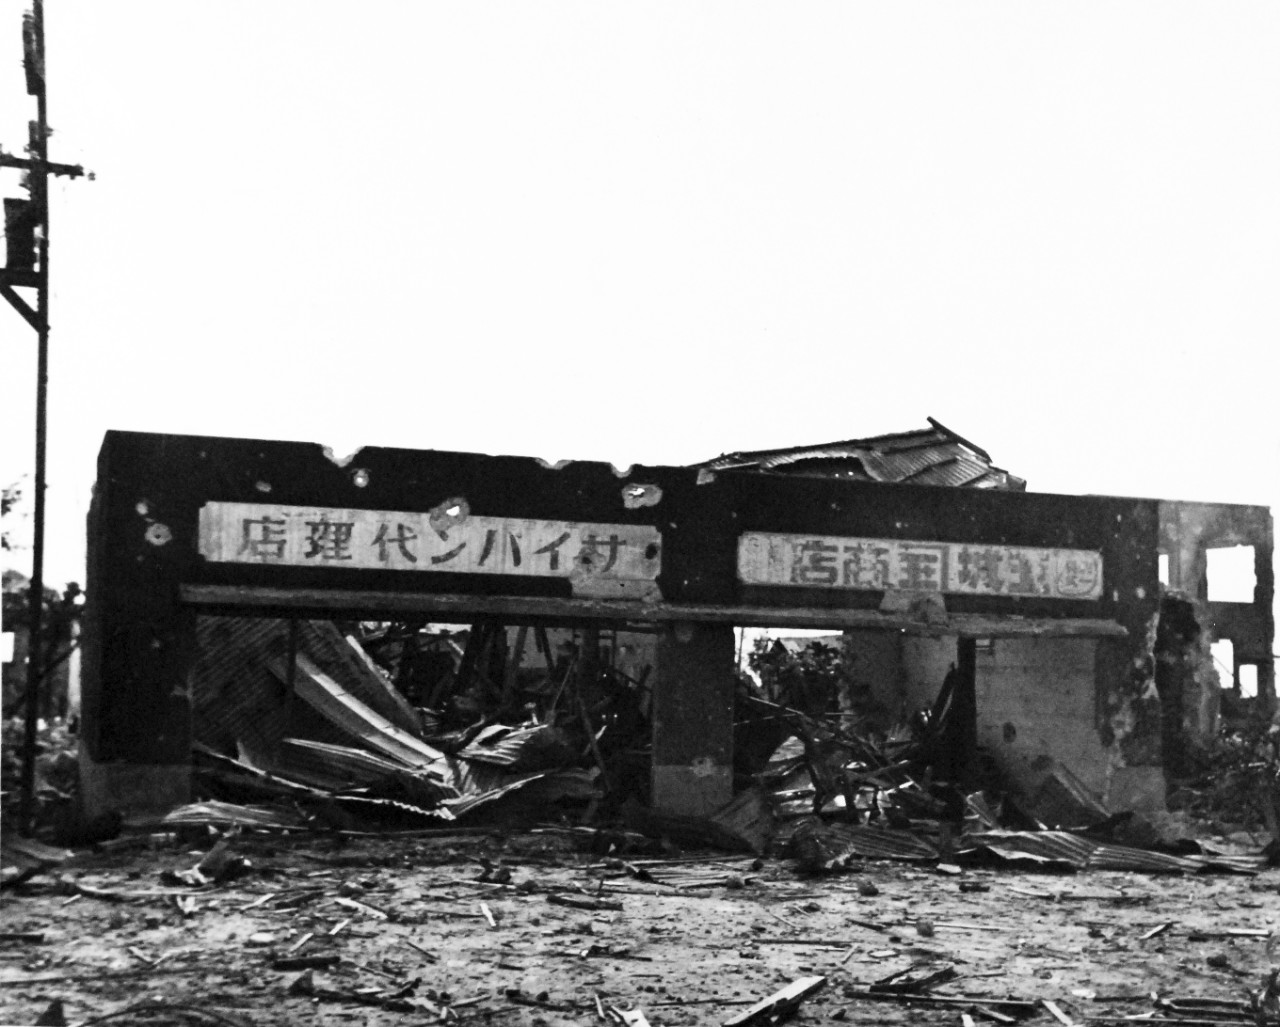 80-G-287177:   Invasion of Saipan, June-July 1944.   General destruction ahead of Marine front lines on Saipan showing a building ruined,  July 2, 1944.     Photographed by USS Indianapolis (CA-35) photographer.   Official U.S. Navy photograph, now in the collections of the National Archives.  (2017/03/21).  